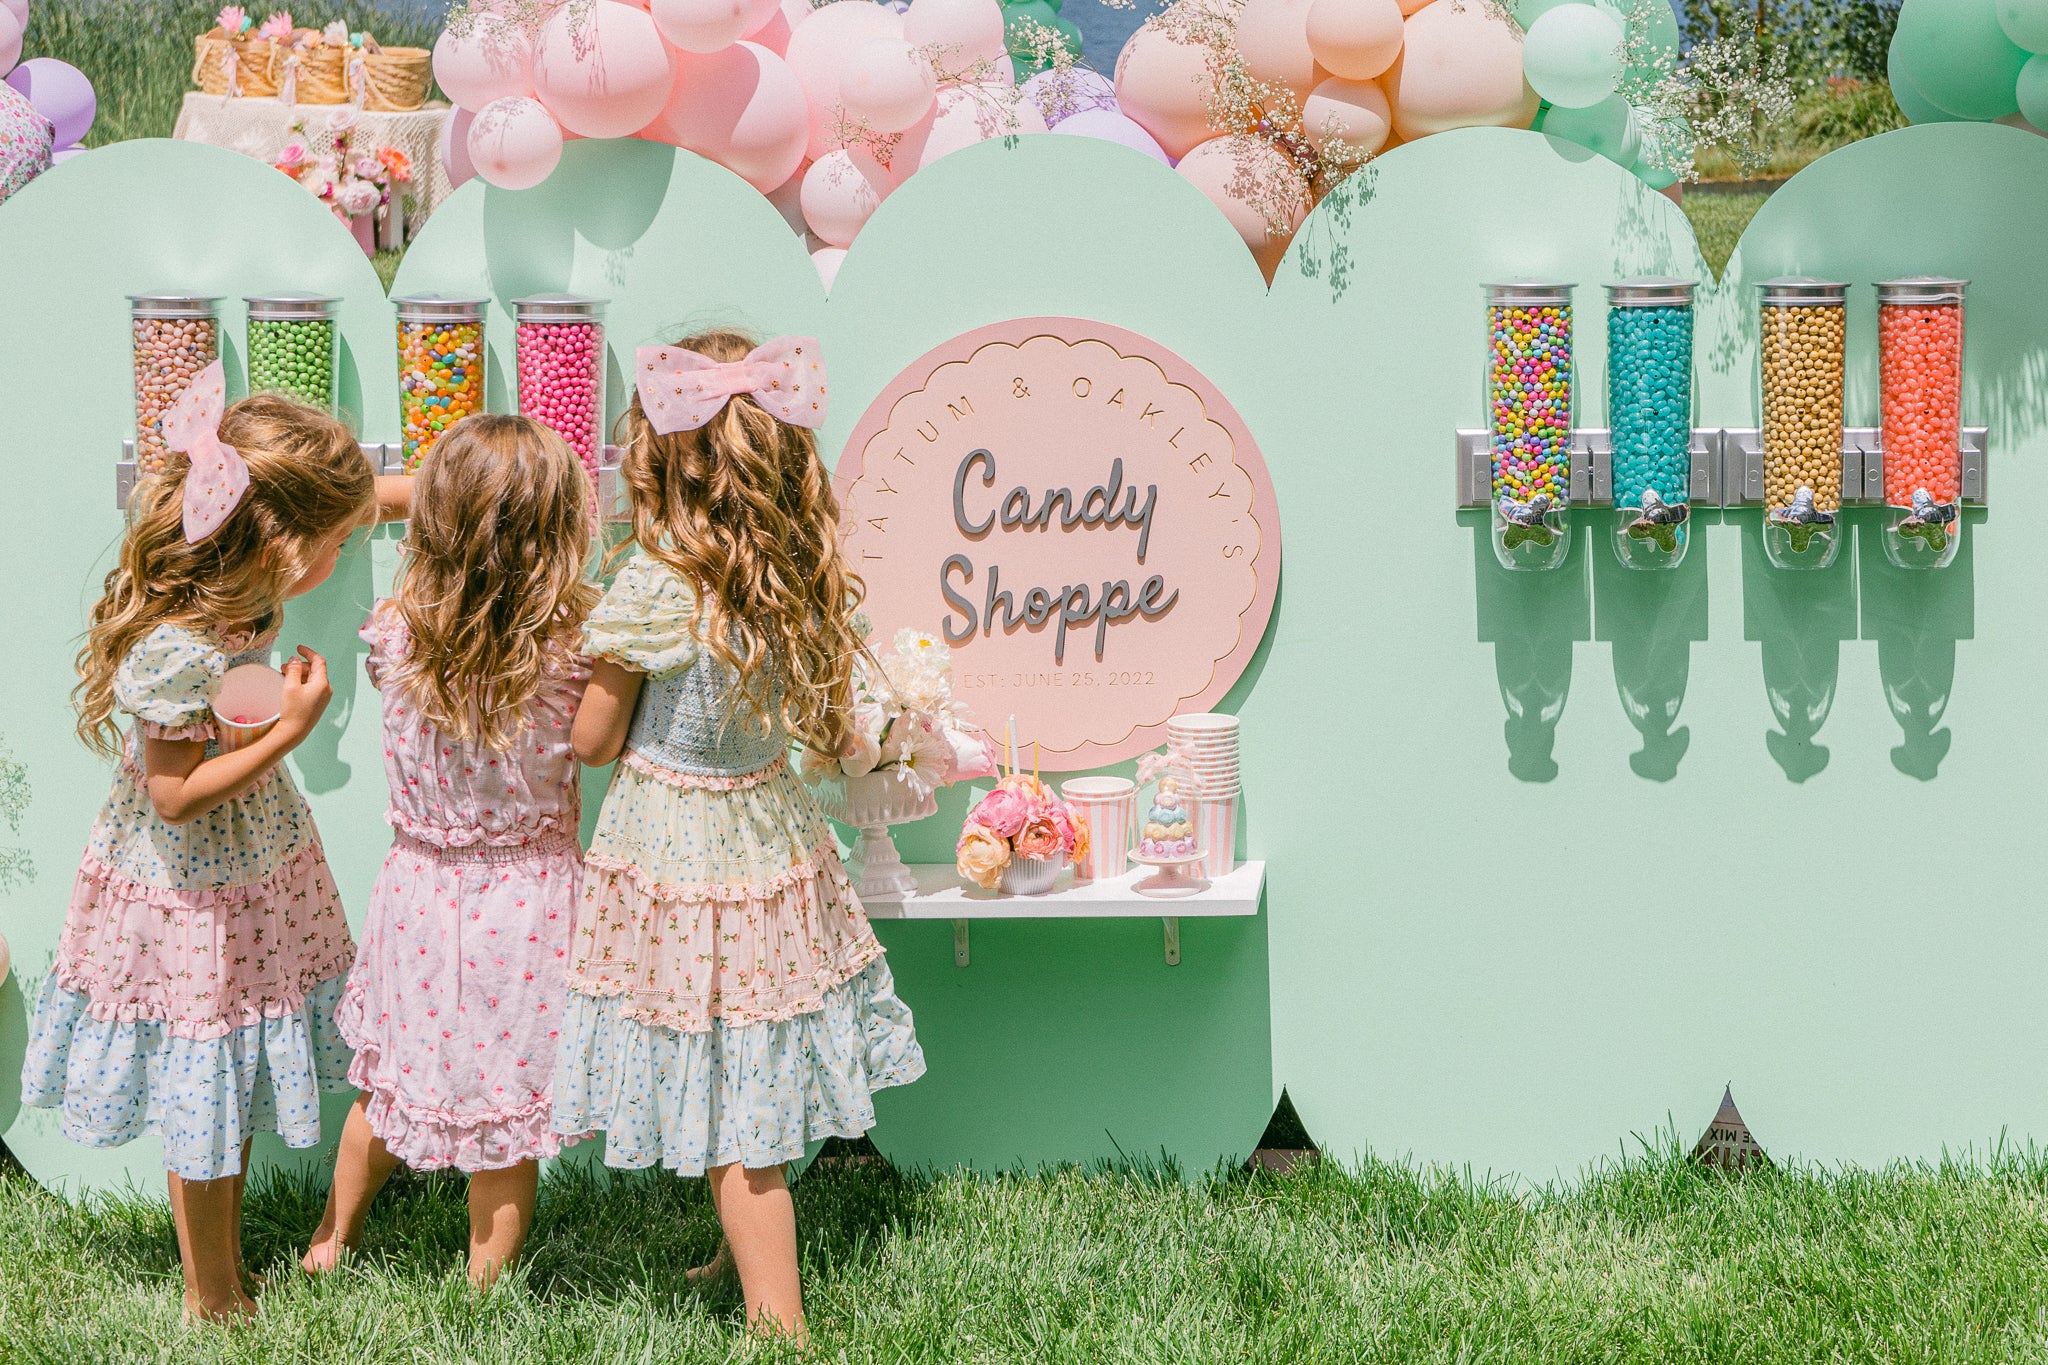 Mini candy shoppe used for a girl's Paris-themed birthday party.